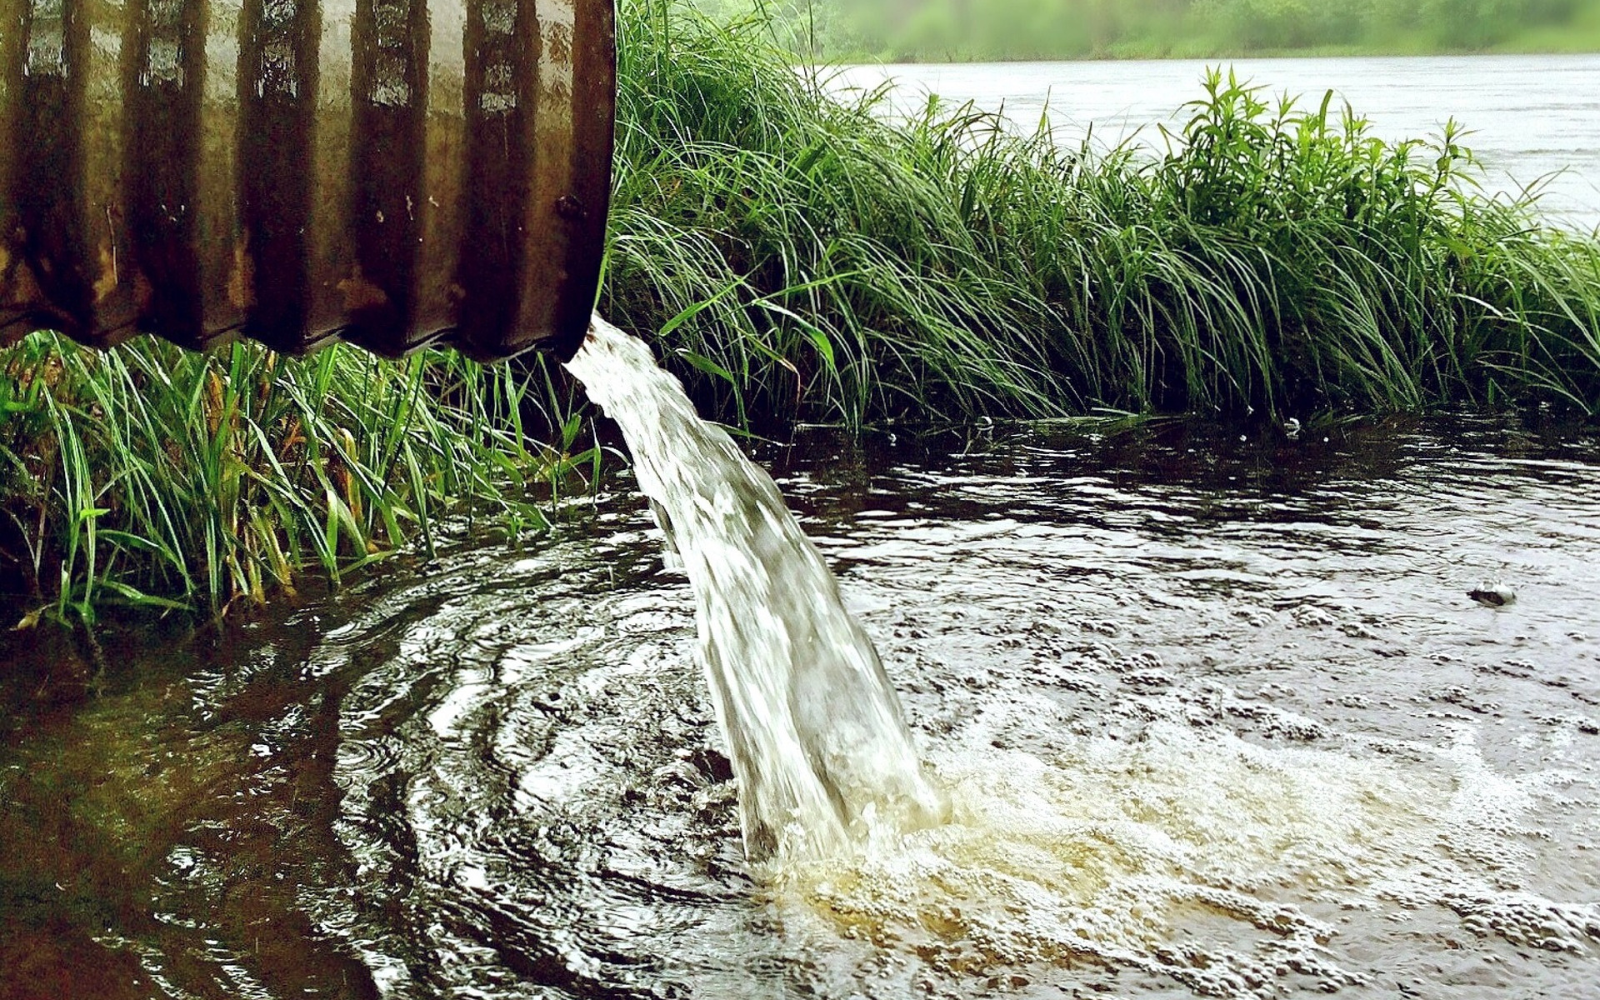 Water rushing from a pipe into a water body